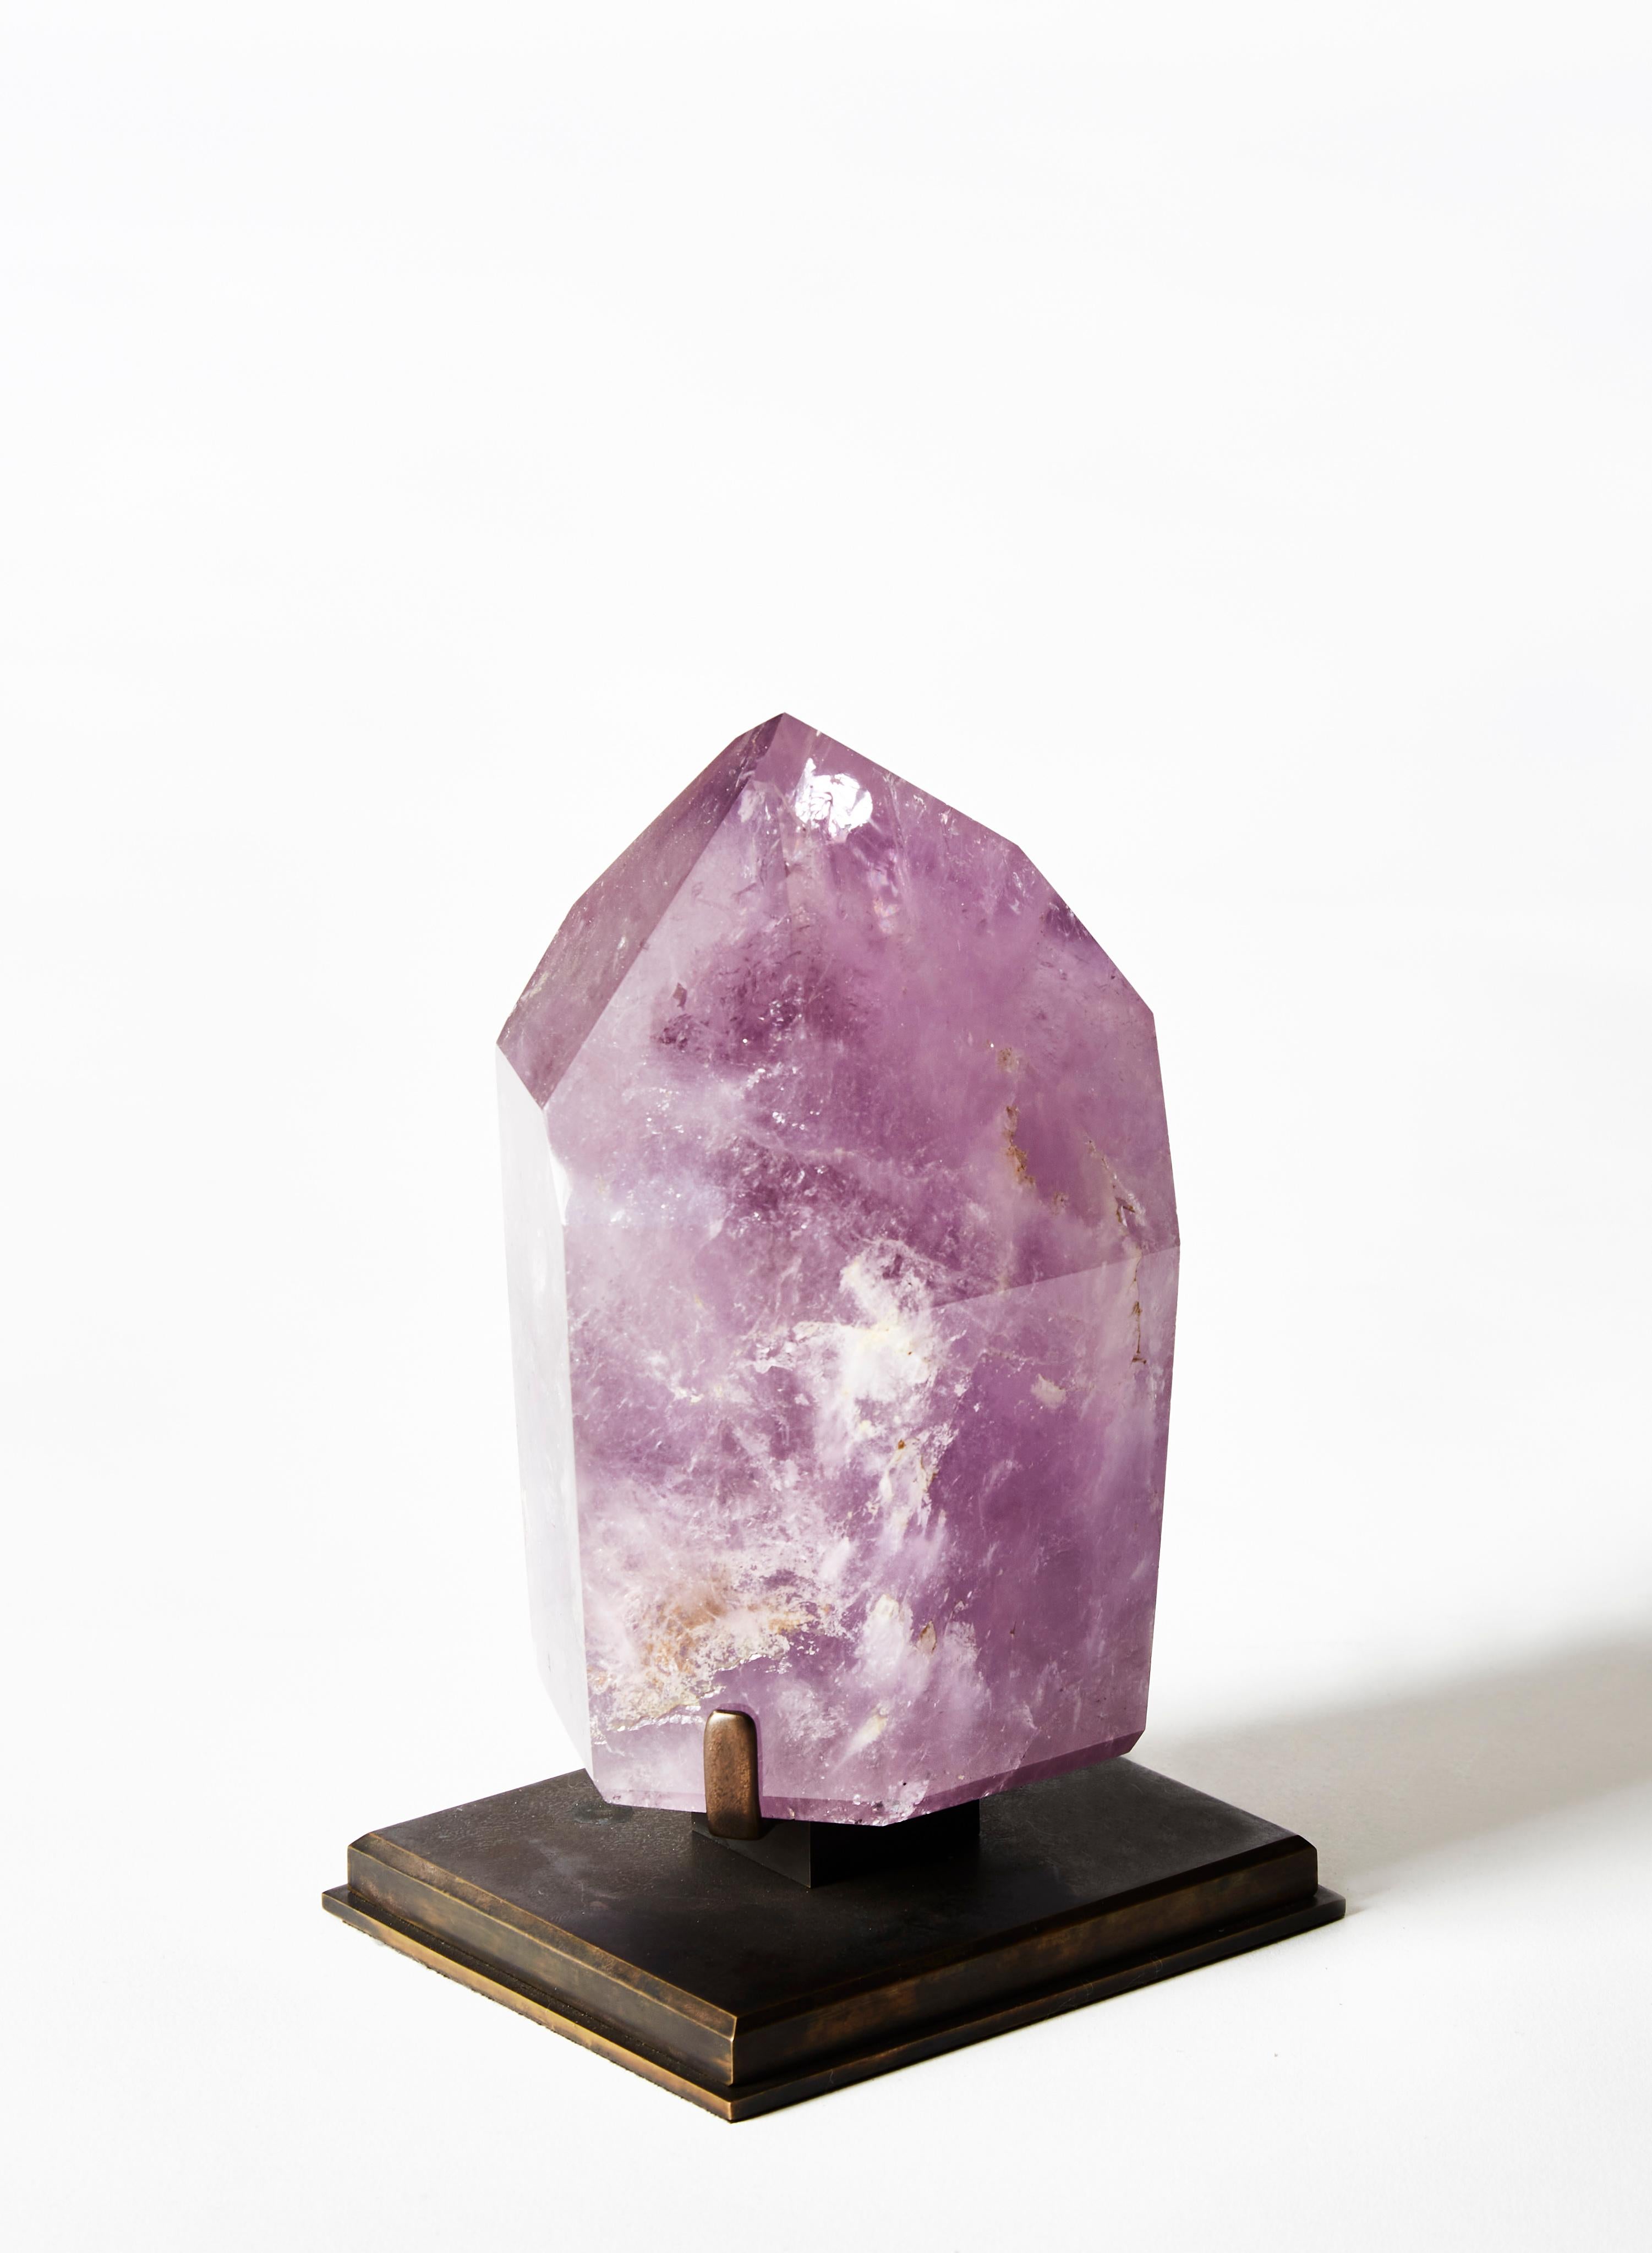 Amethyst stone with handmade base in patinated copper.